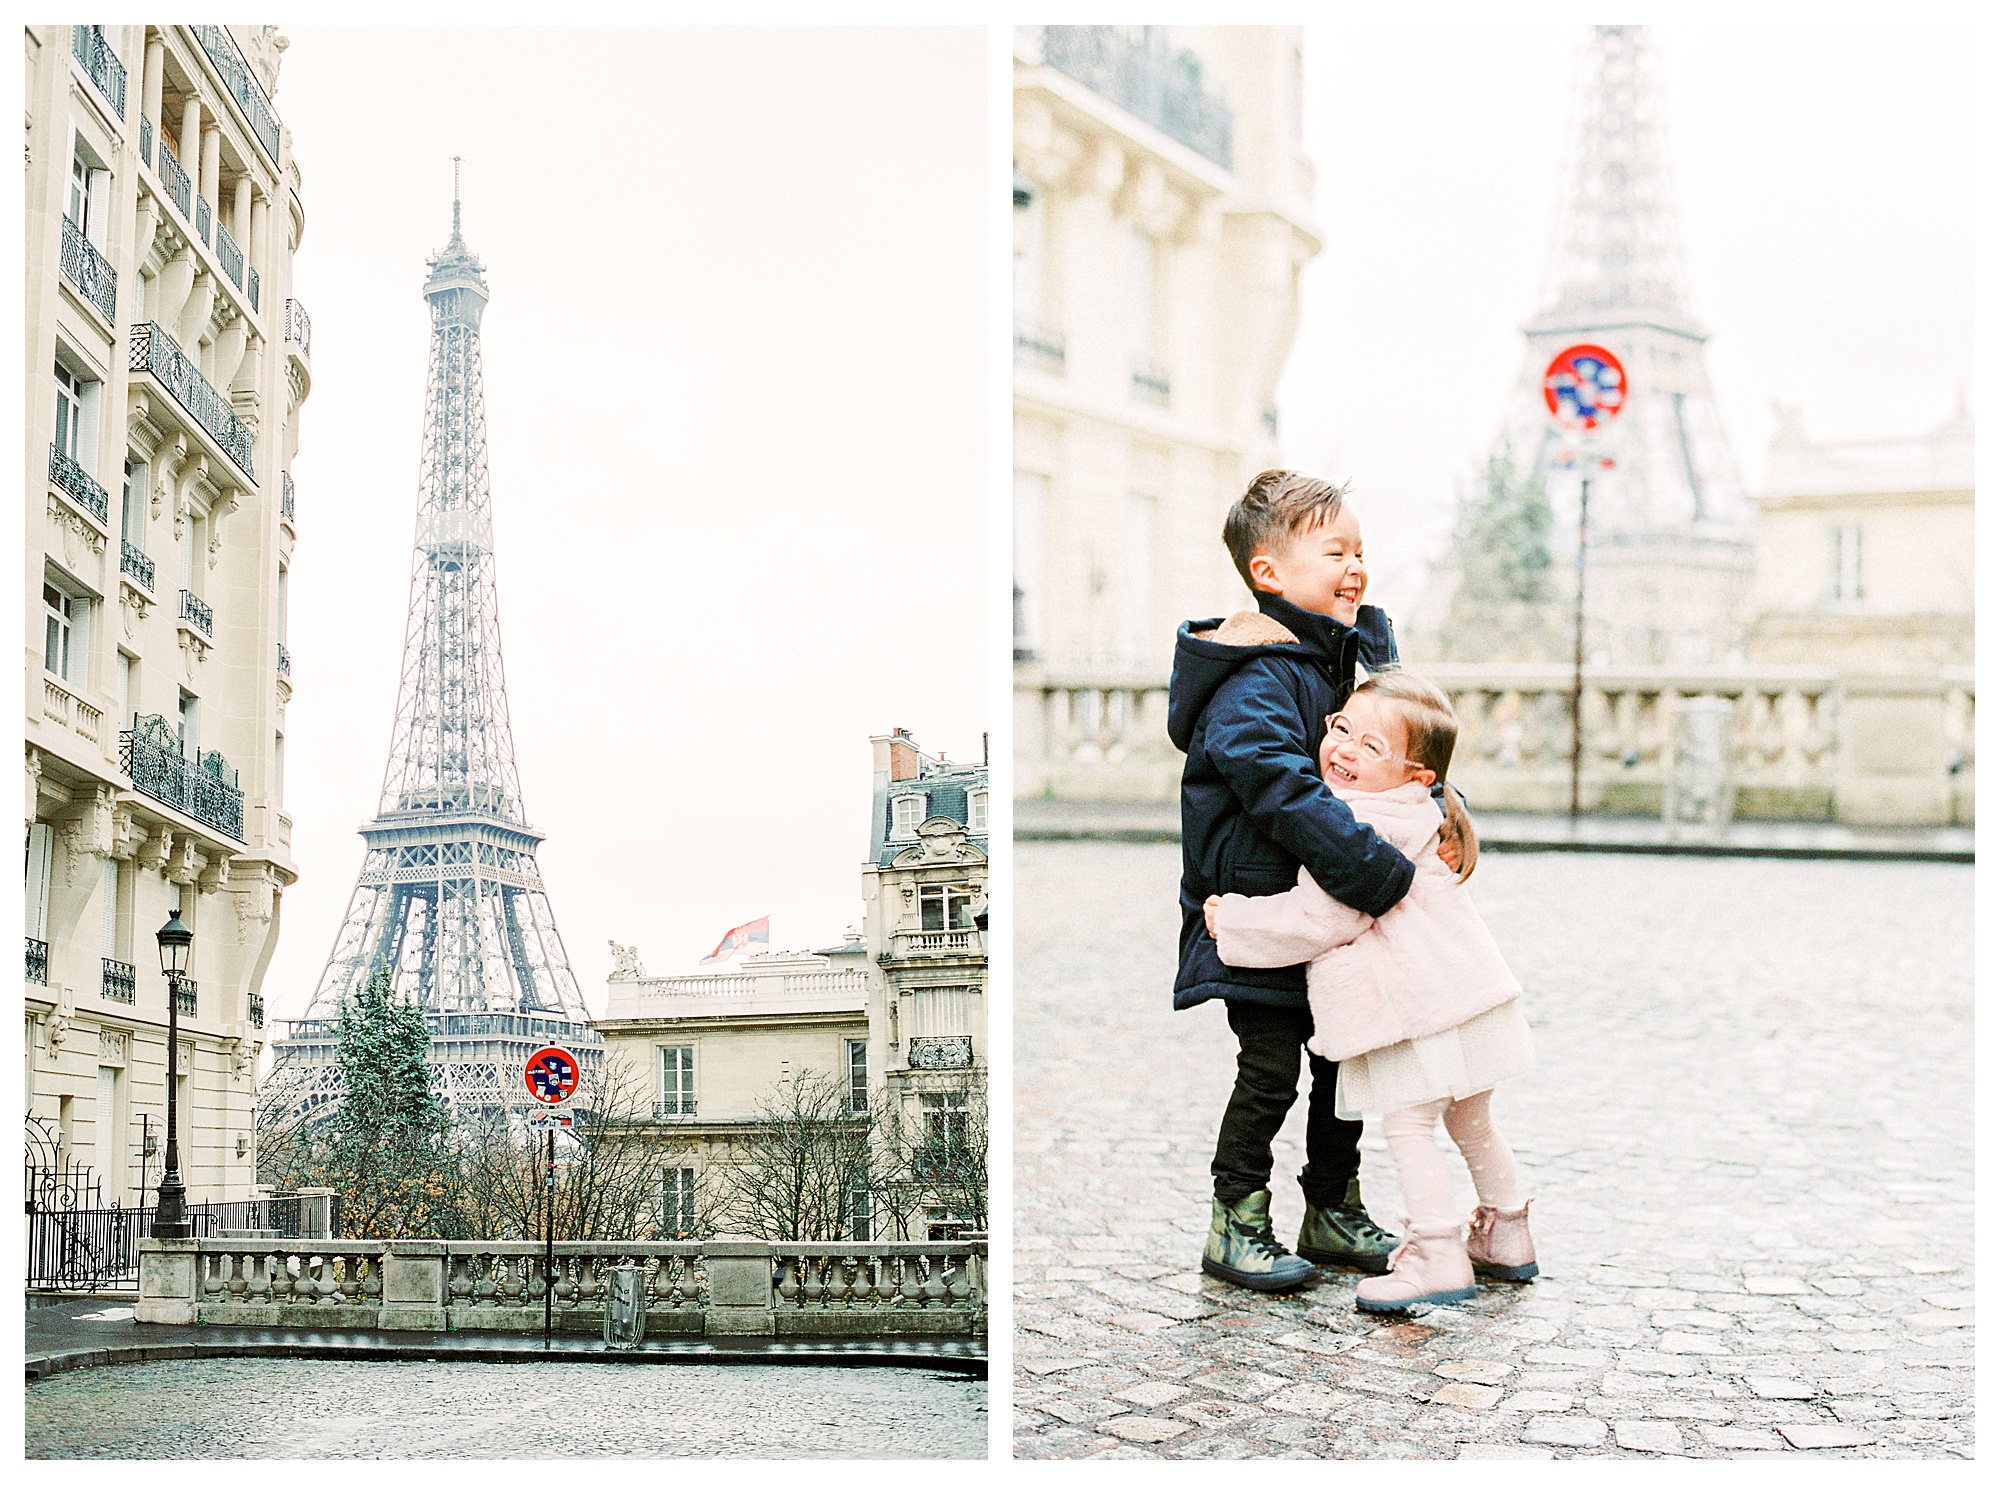 Two young children at the Eiffel Tower